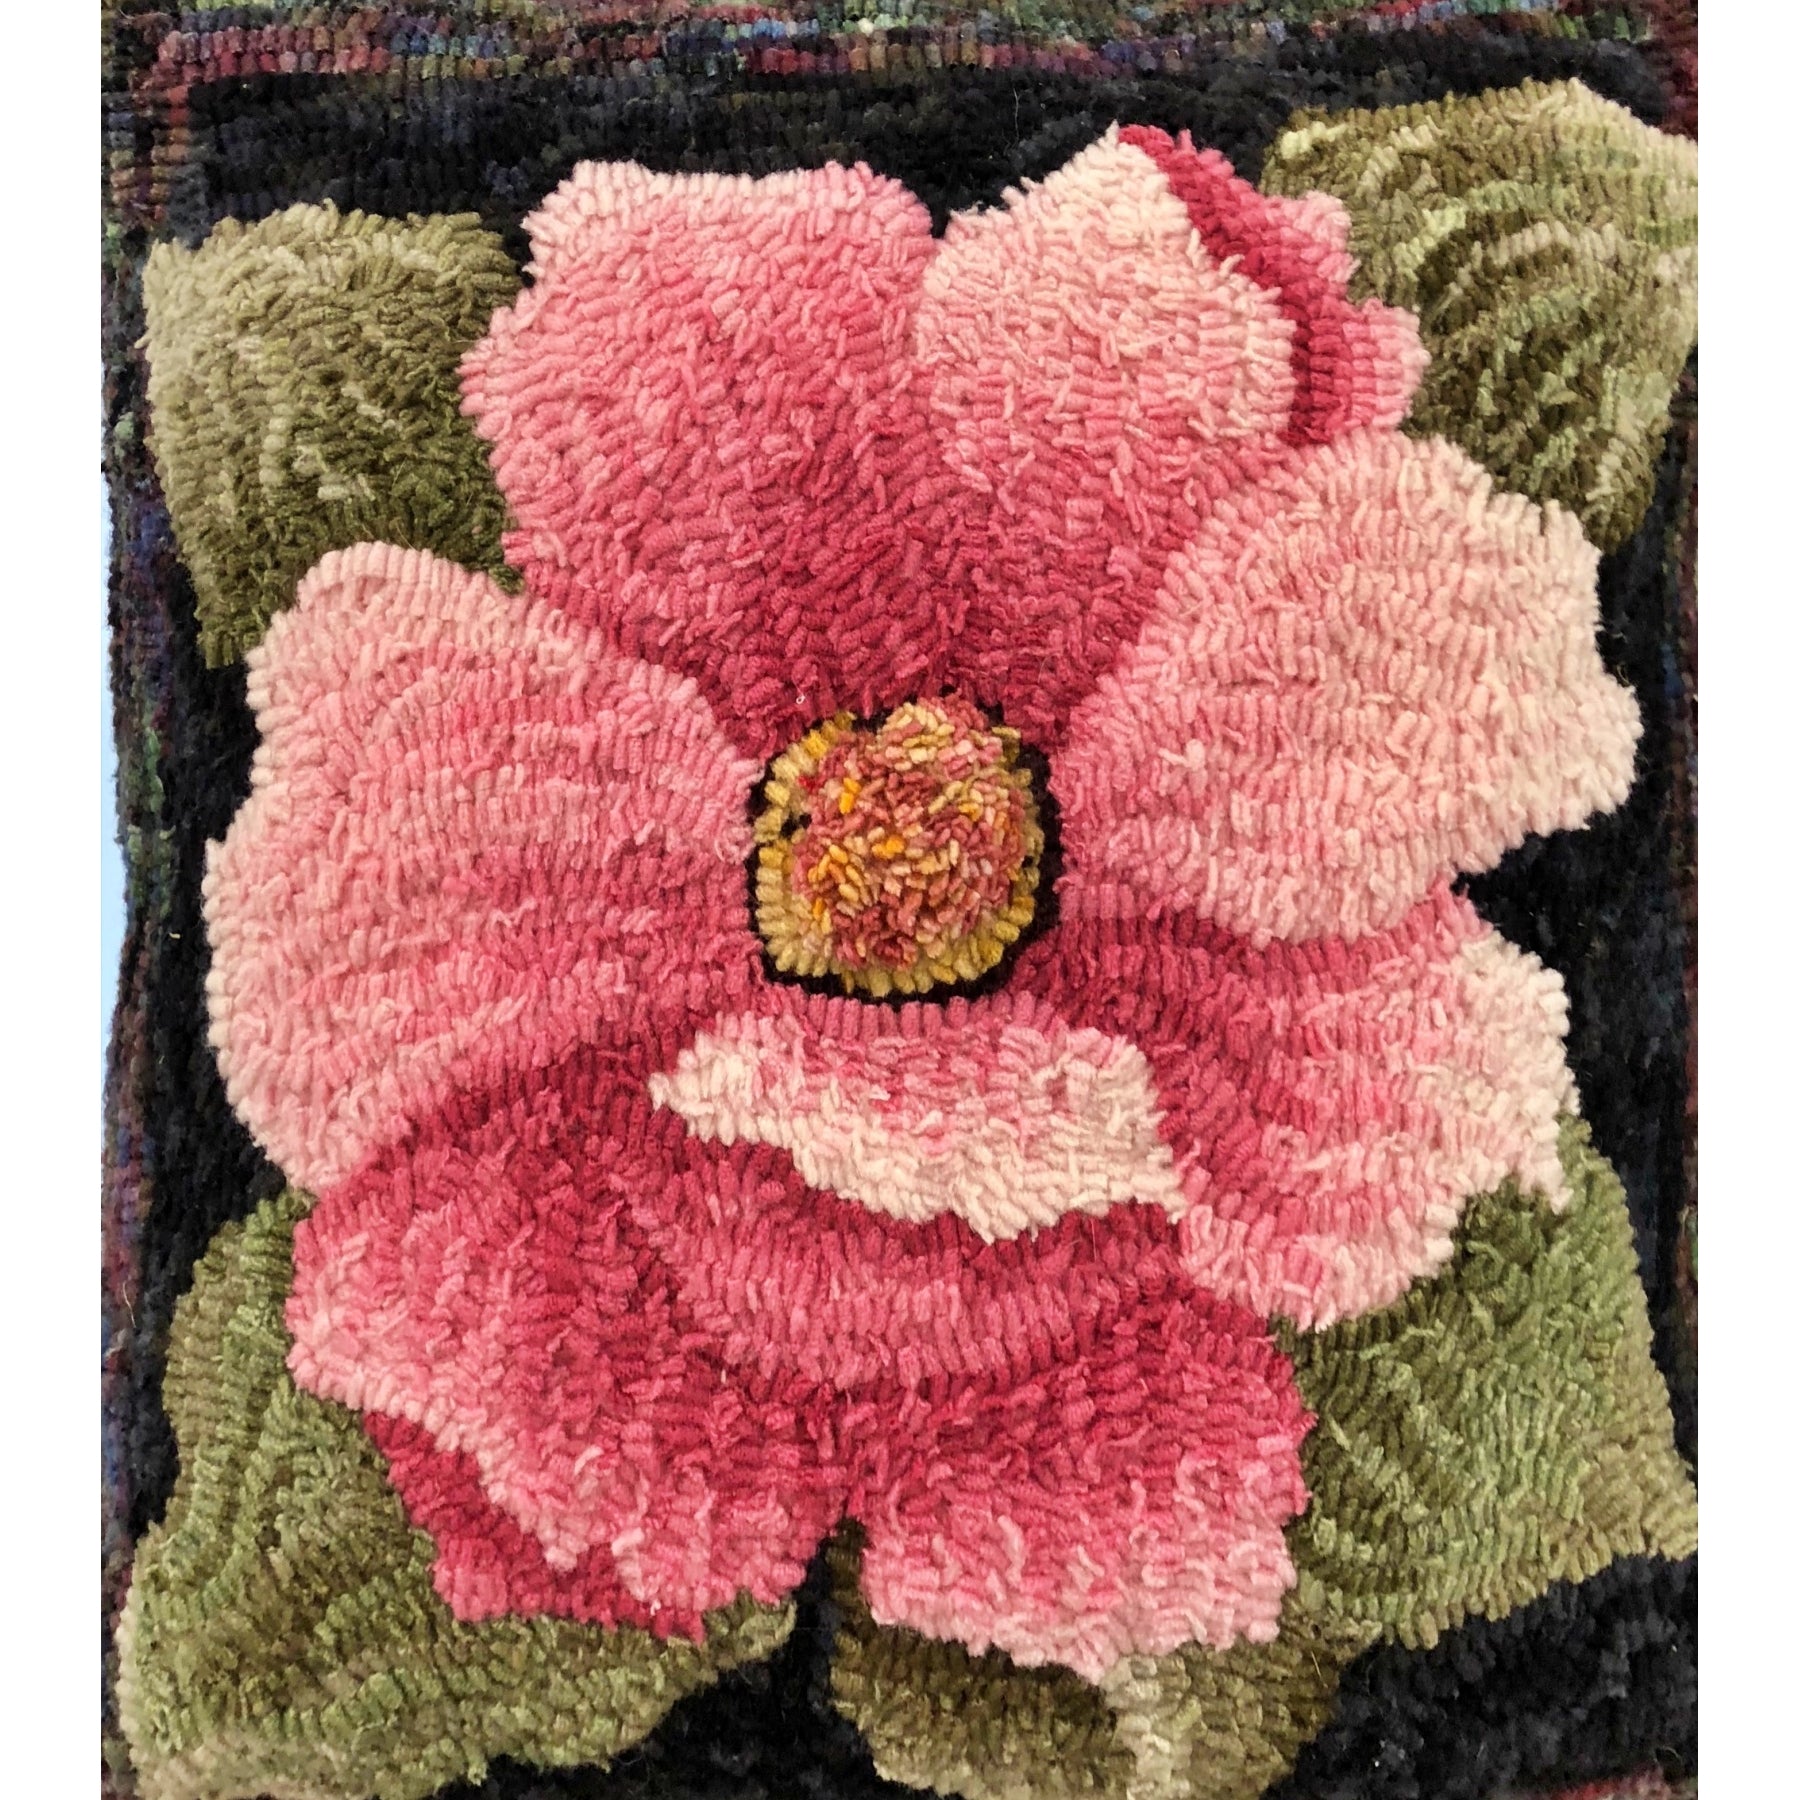 Magnolia, rug hooked by Janice Daniels